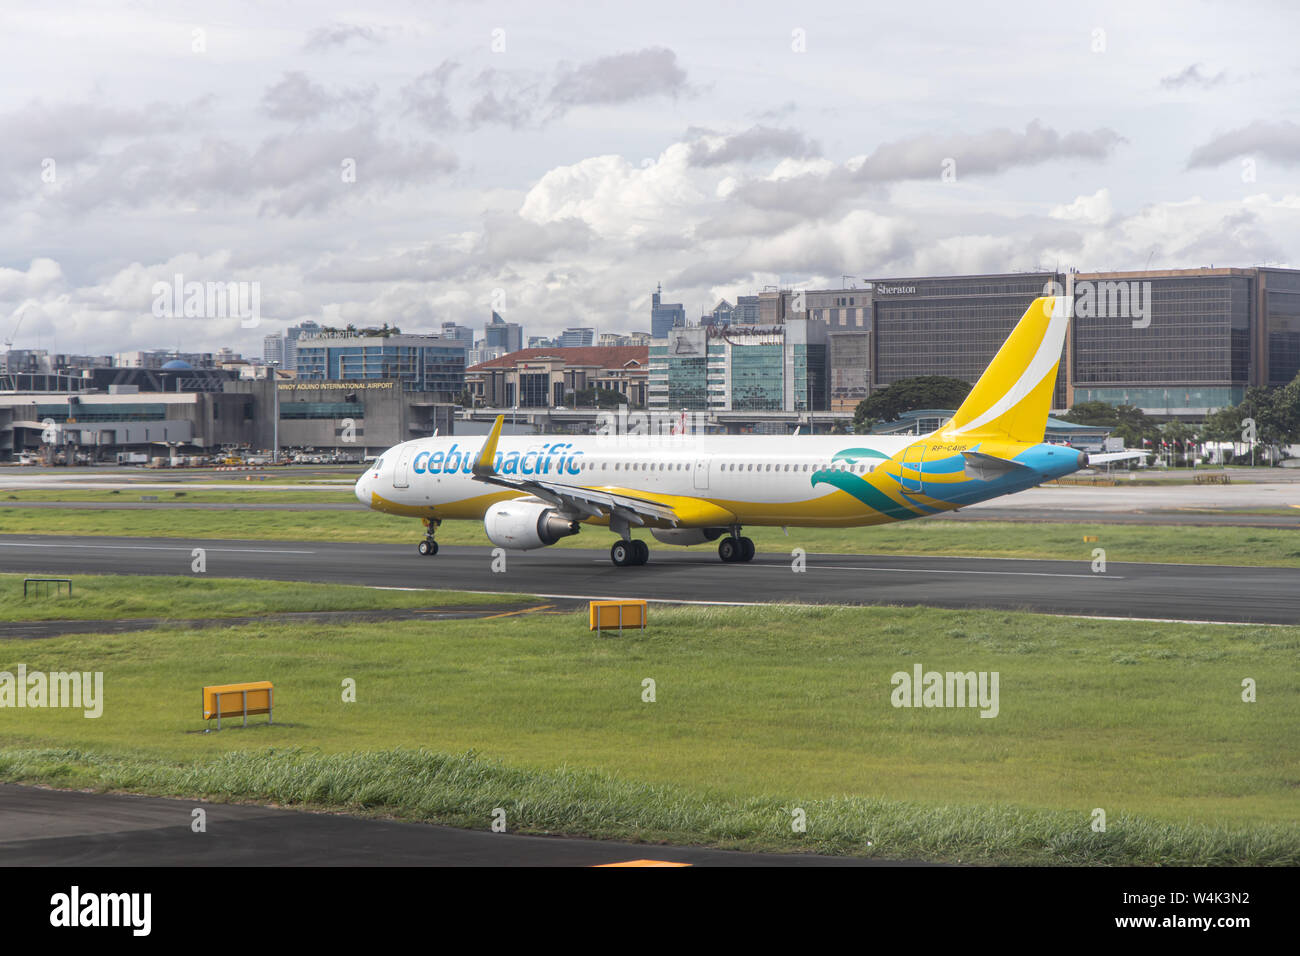 Jul 18, 2019 Cebu Pacific airline Aircraft moving to the runway to take off, Manila, Philippines Stock Photo